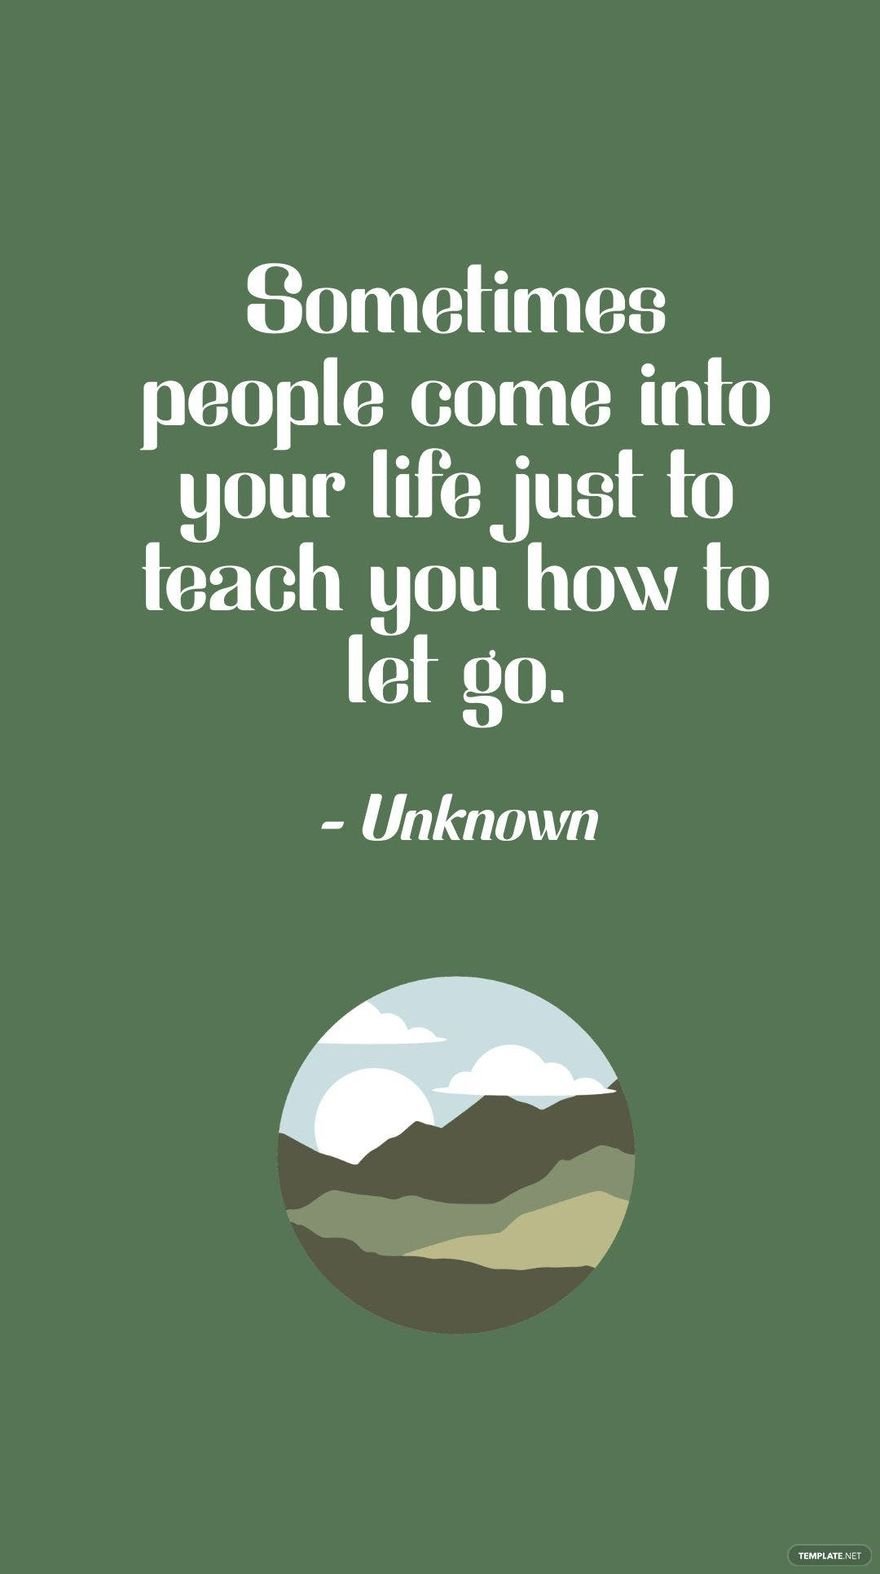 Free Unknown - Sometimes people come into your life just to teach you how to let go.